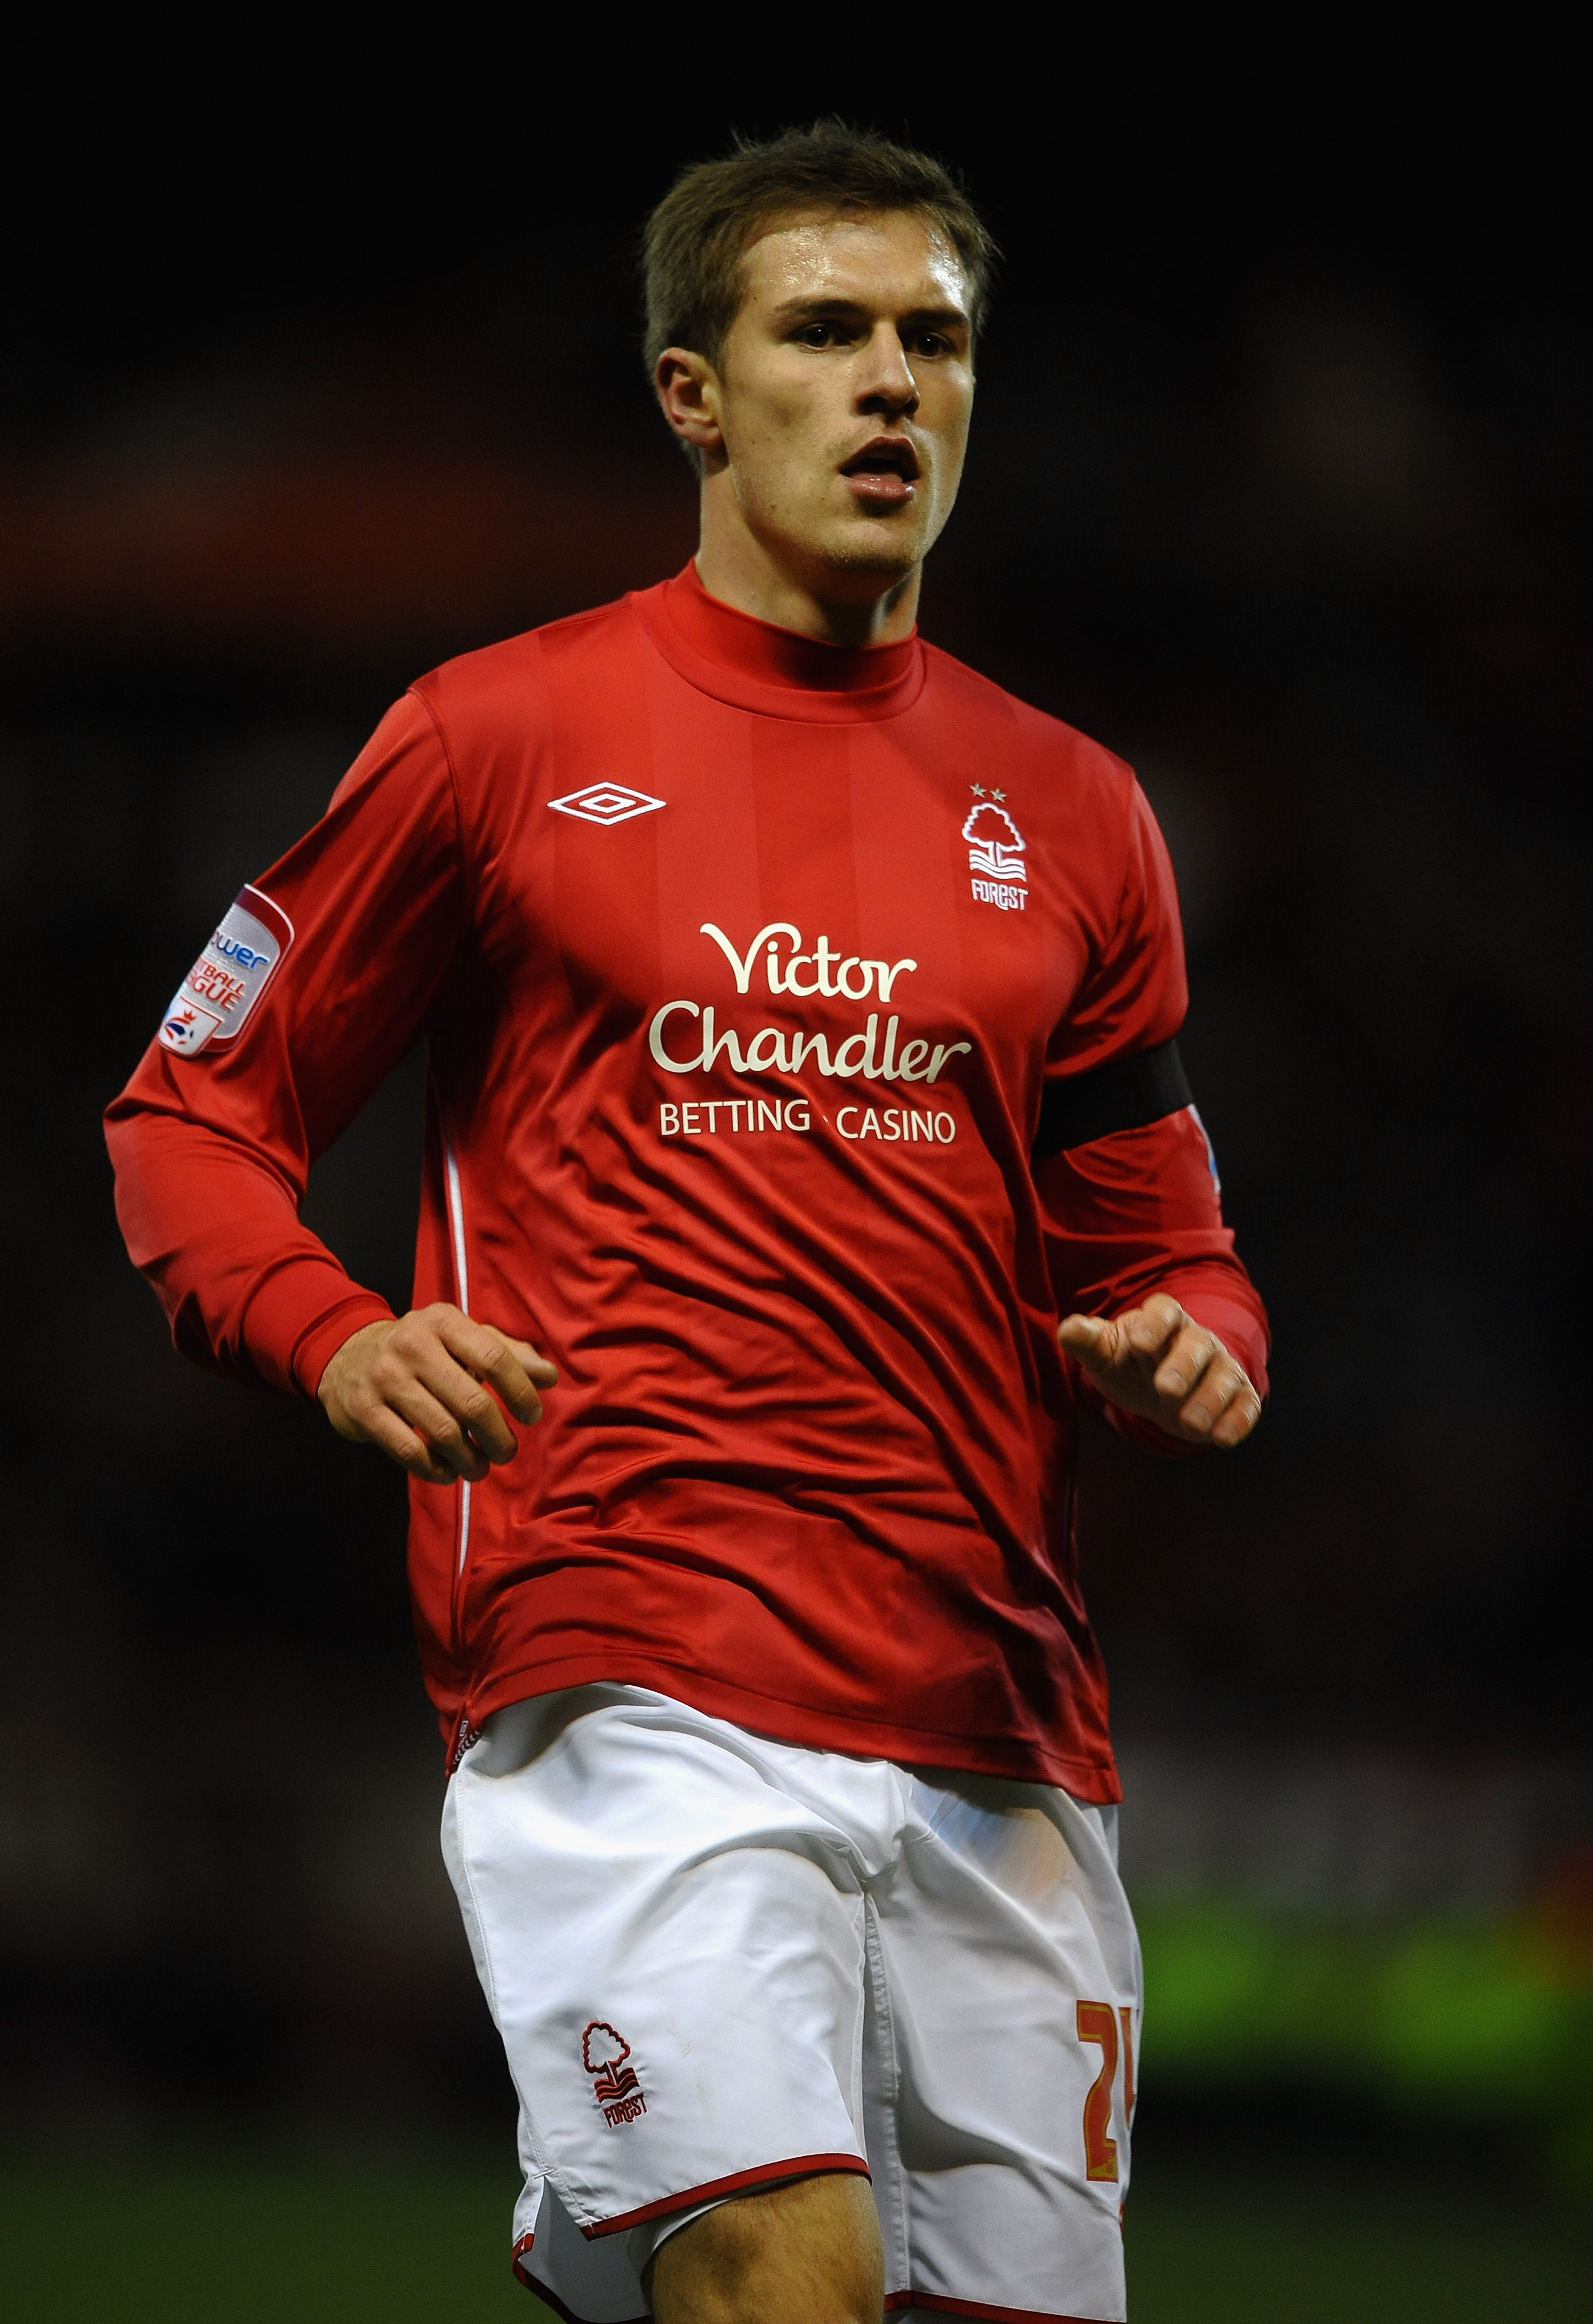 NOTTINGHAM, ENGLAND - DECEMBER 18:  Arron Ramsey of Nottingham Forest in action during the npower Championship match between Nottingham Forest and Crystal Palace at the City Ground on December 18, 2010 in Nottingham, England.  (Photo by Laurence Griffiths